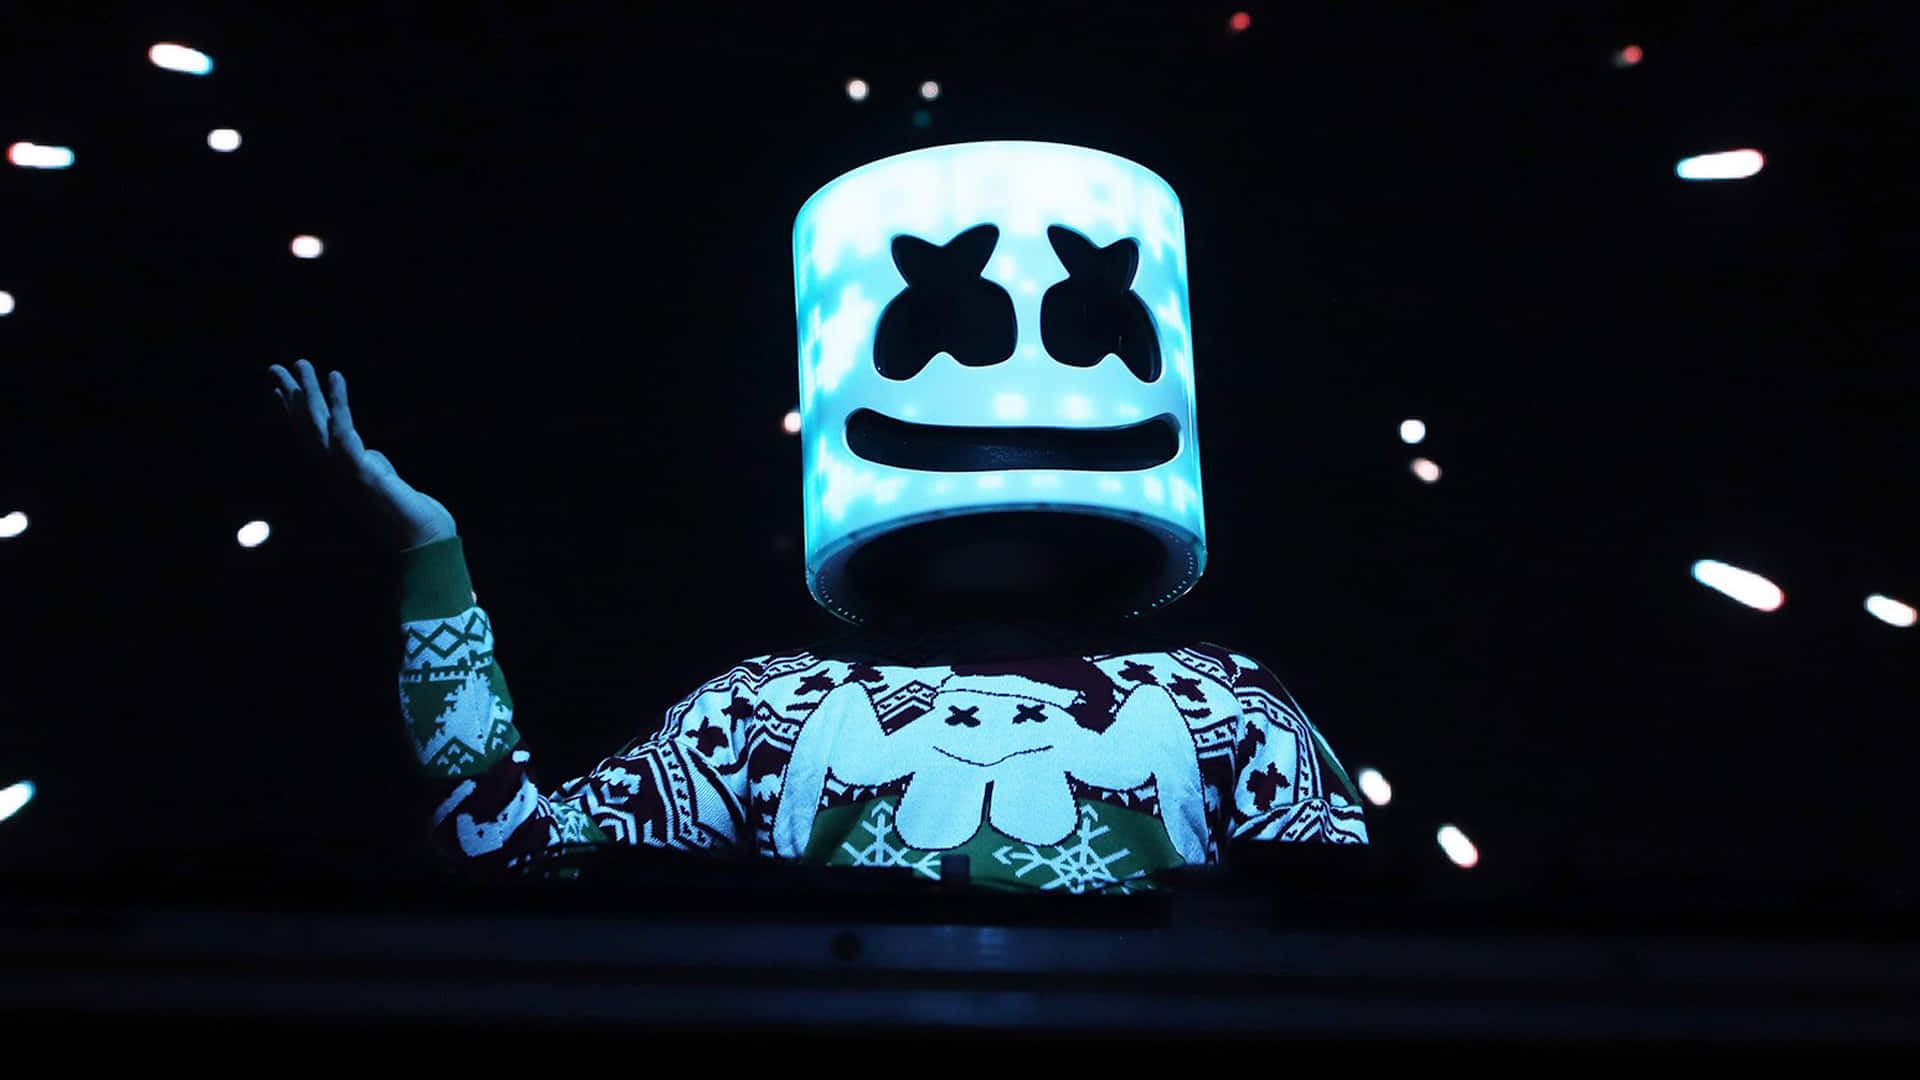 Marshmello - A Music Producer Reaching the Head of The Charts